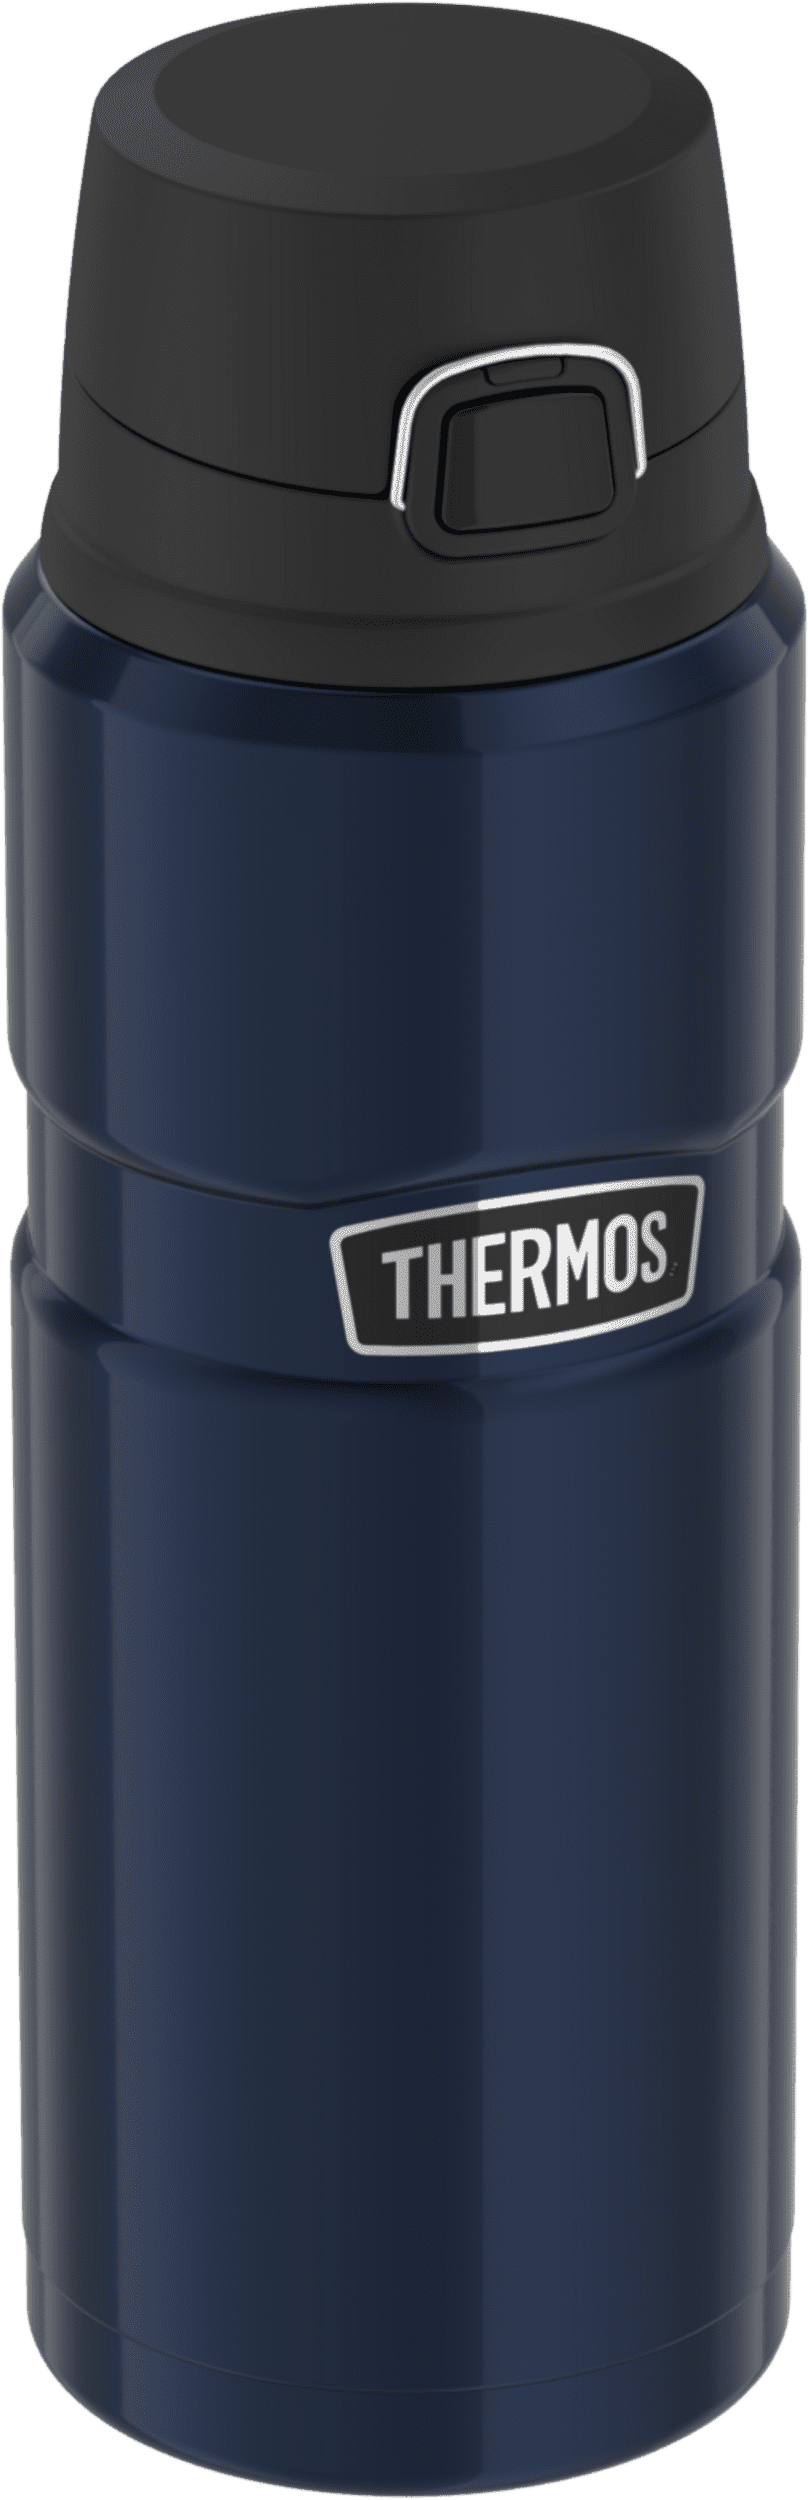 Thermos Isoliertrinkflasche Stainless King midnight blue 0,7l, oben